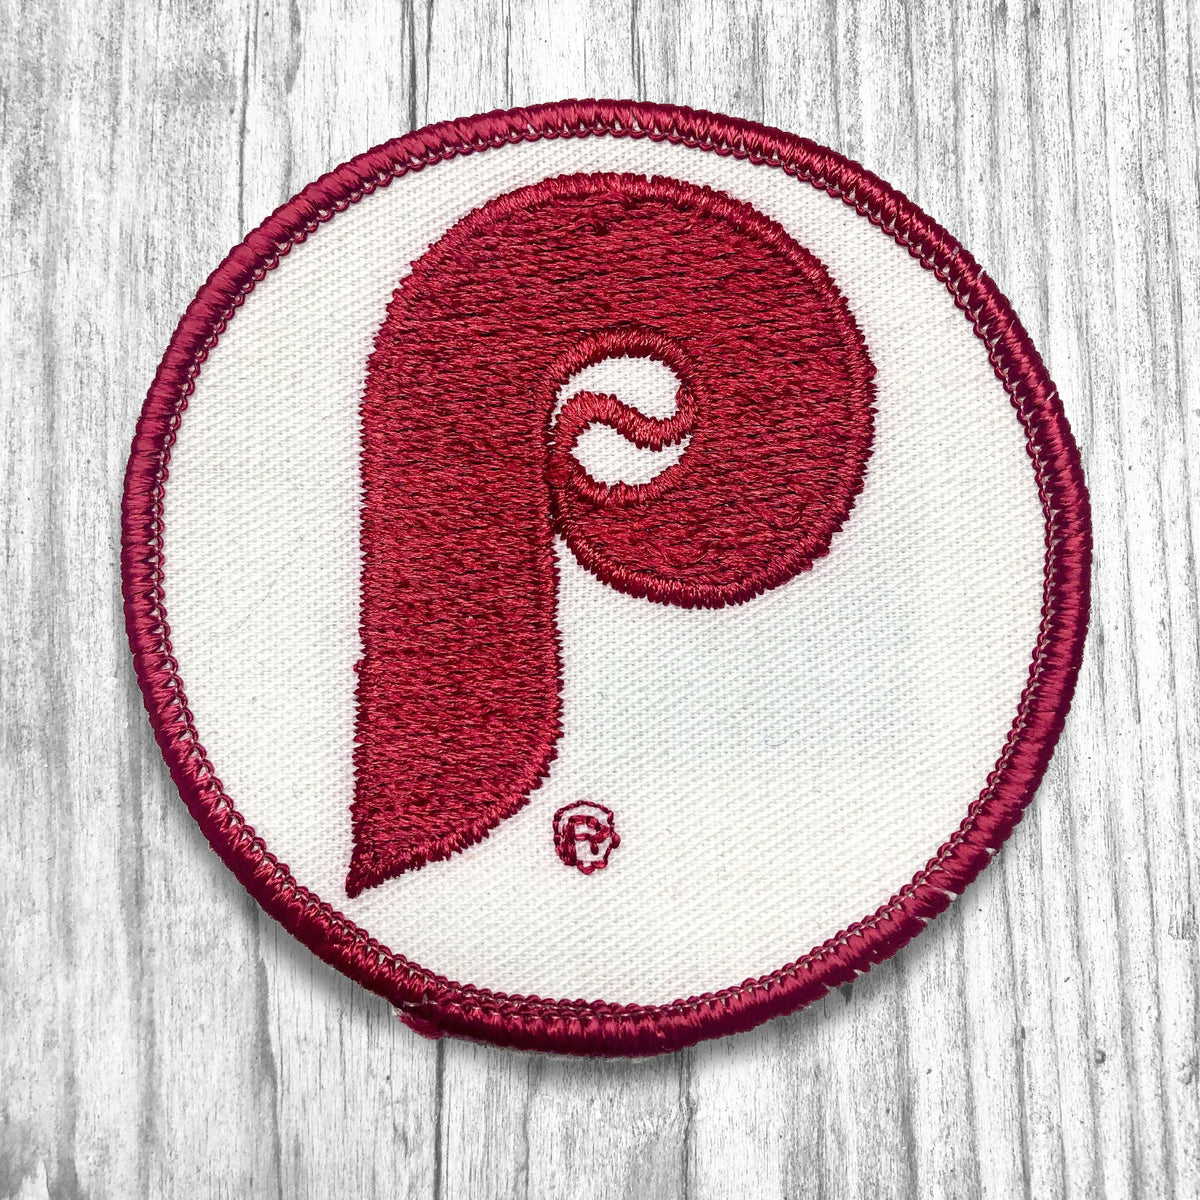 2009 Philadelphia Phillies #35 Game Used Cream Jersey 25th Patch